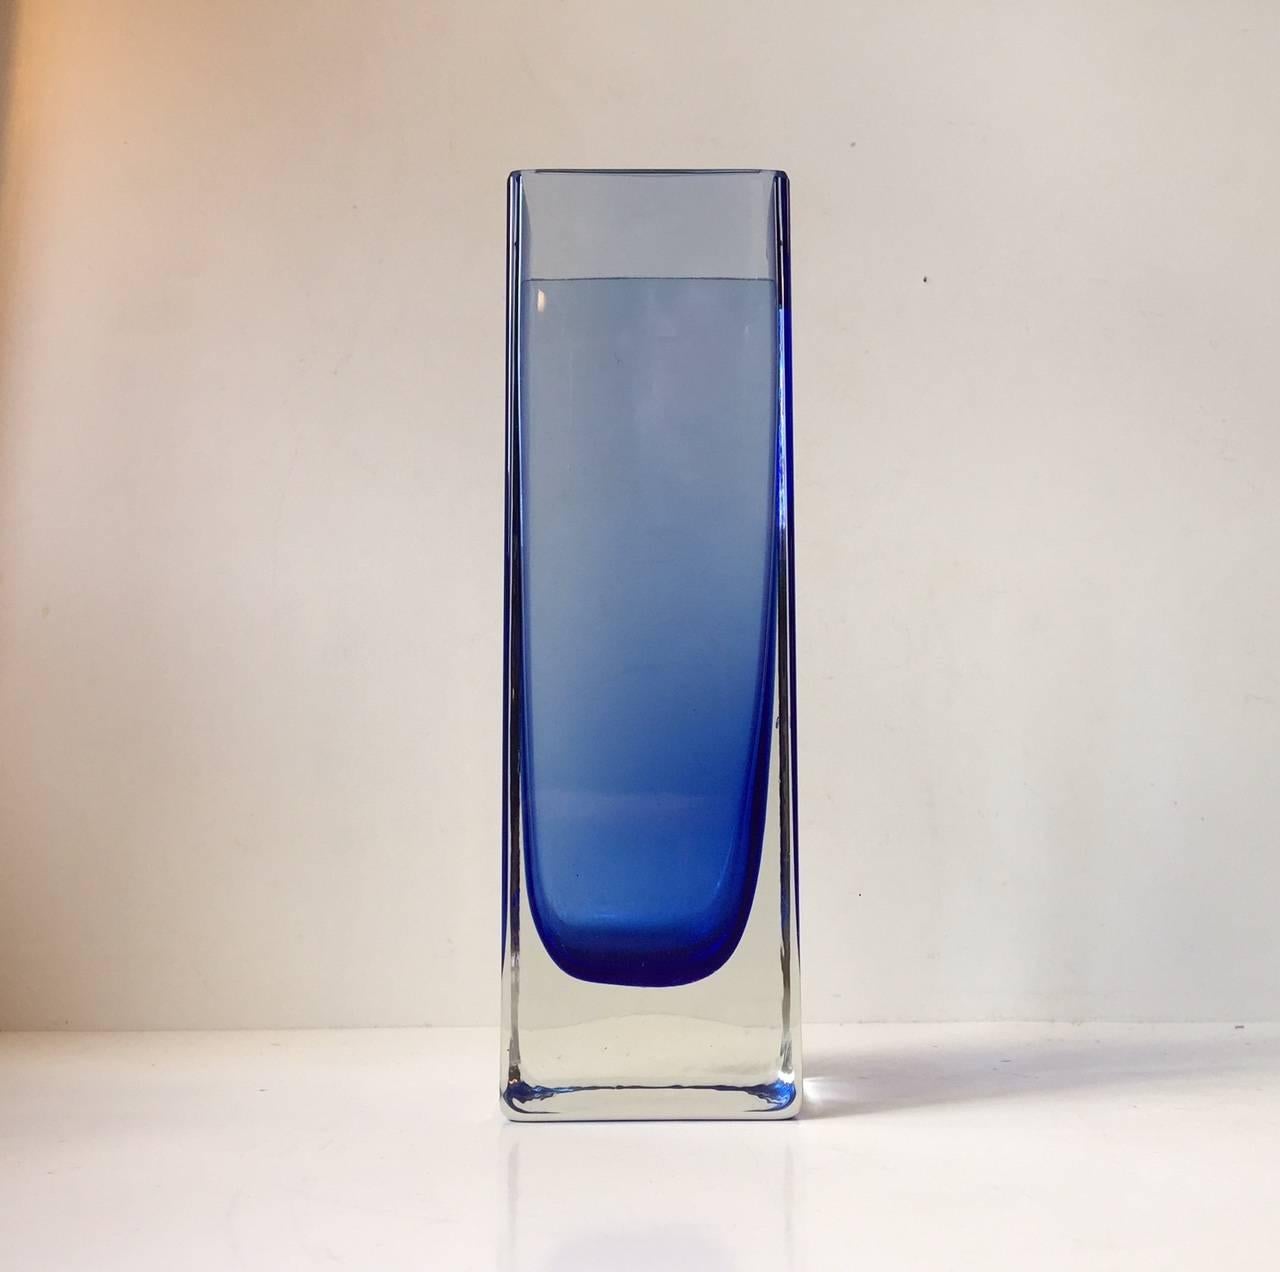 Mid-Century glass vase with blue hues designed by Gunnar Ander. Great 'Ice-Breaker' for minimalistic interiors. Measures: Height 8.4 inches.